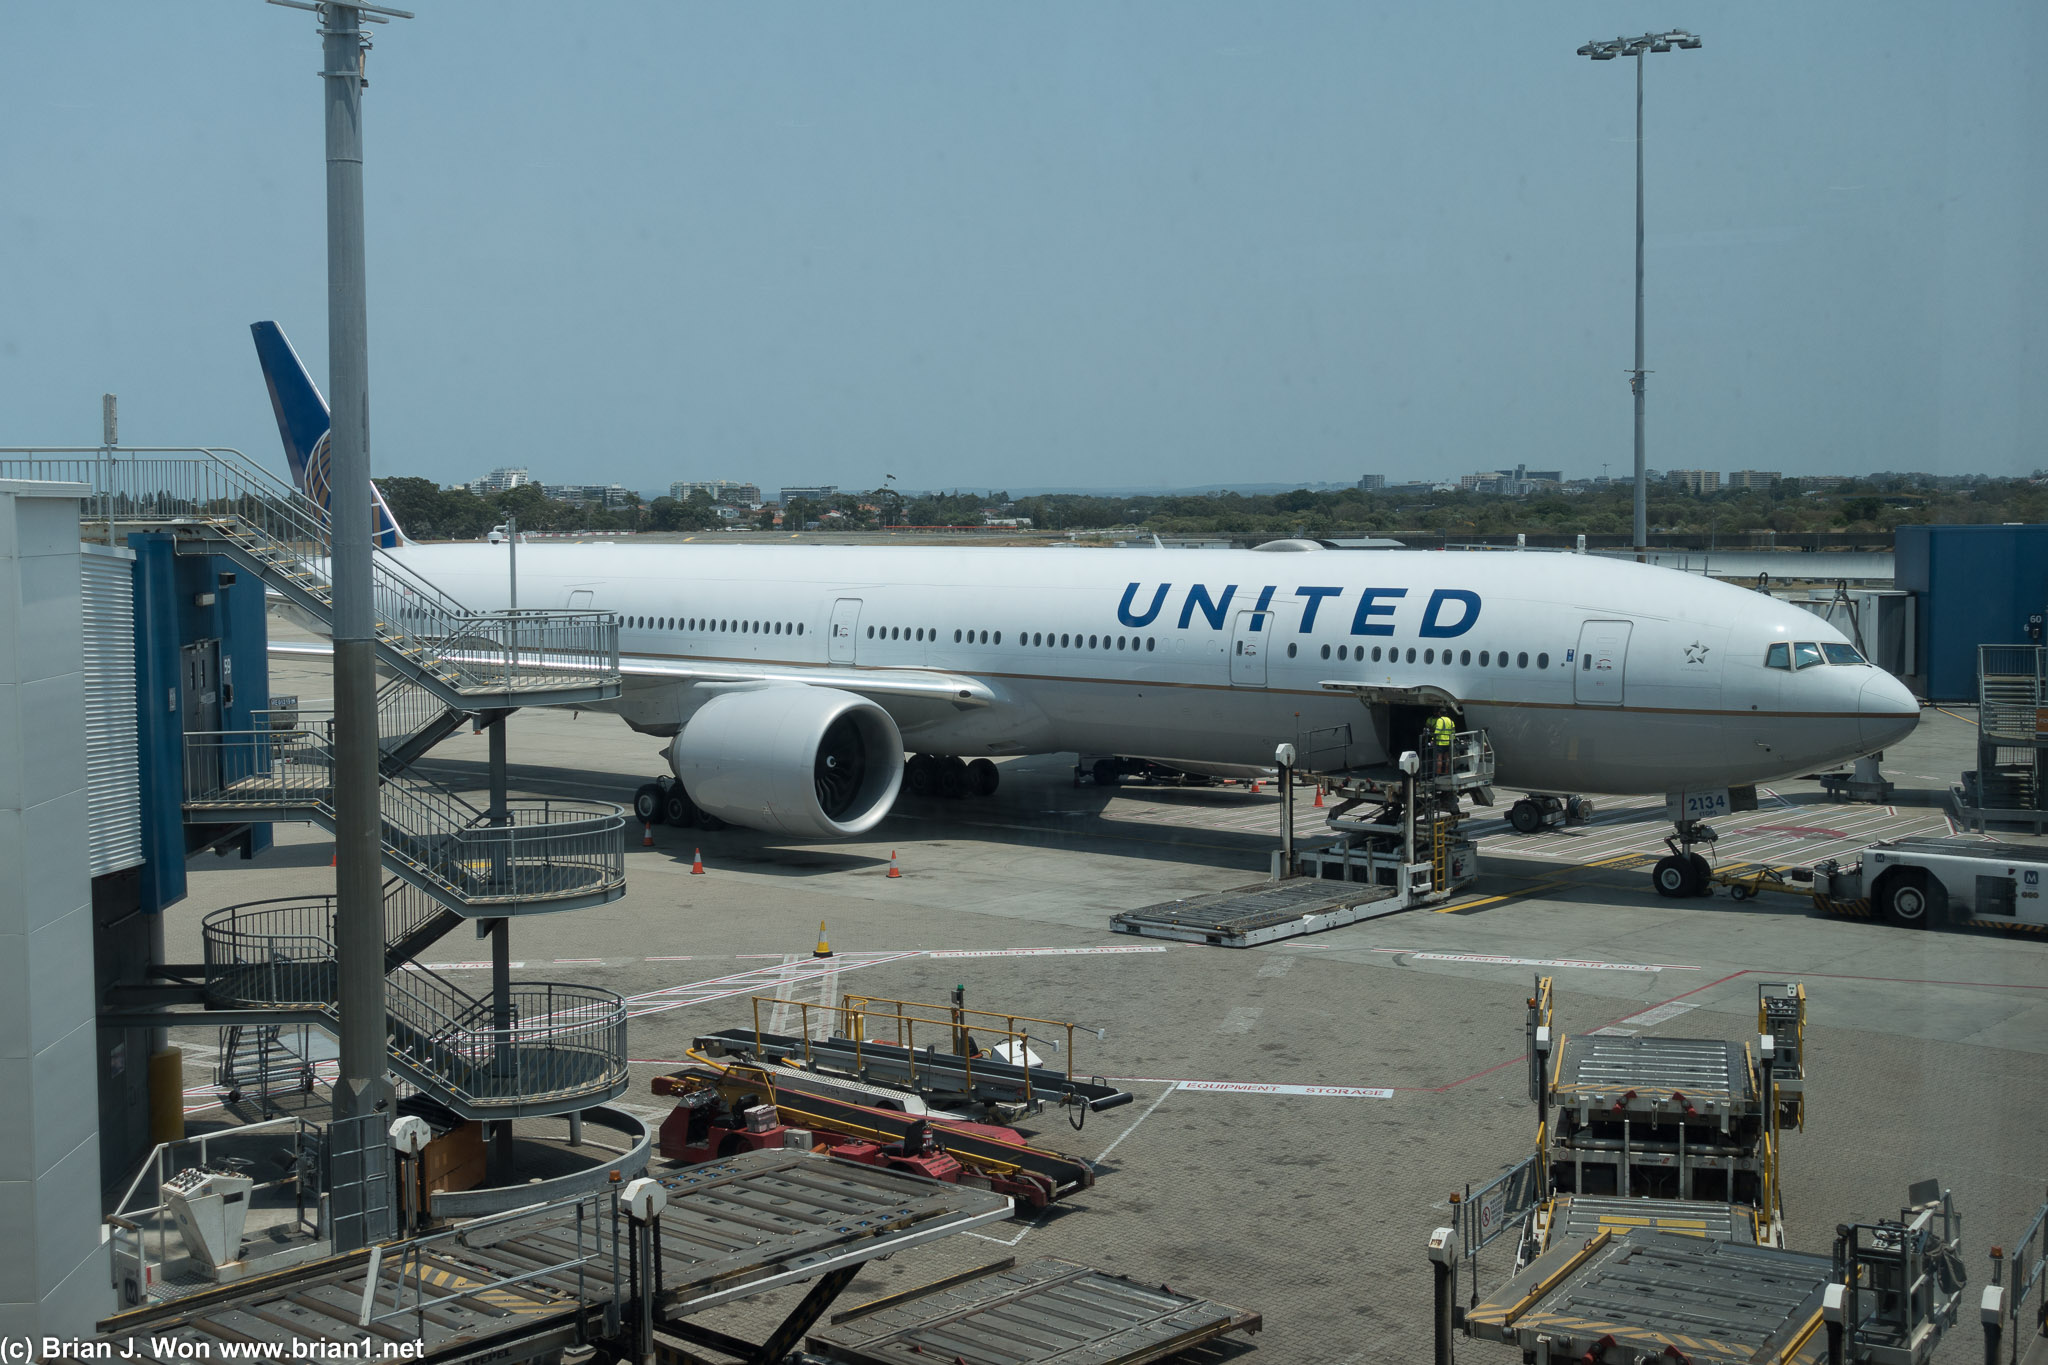 Today's ride home, United 777-300ER #2134.